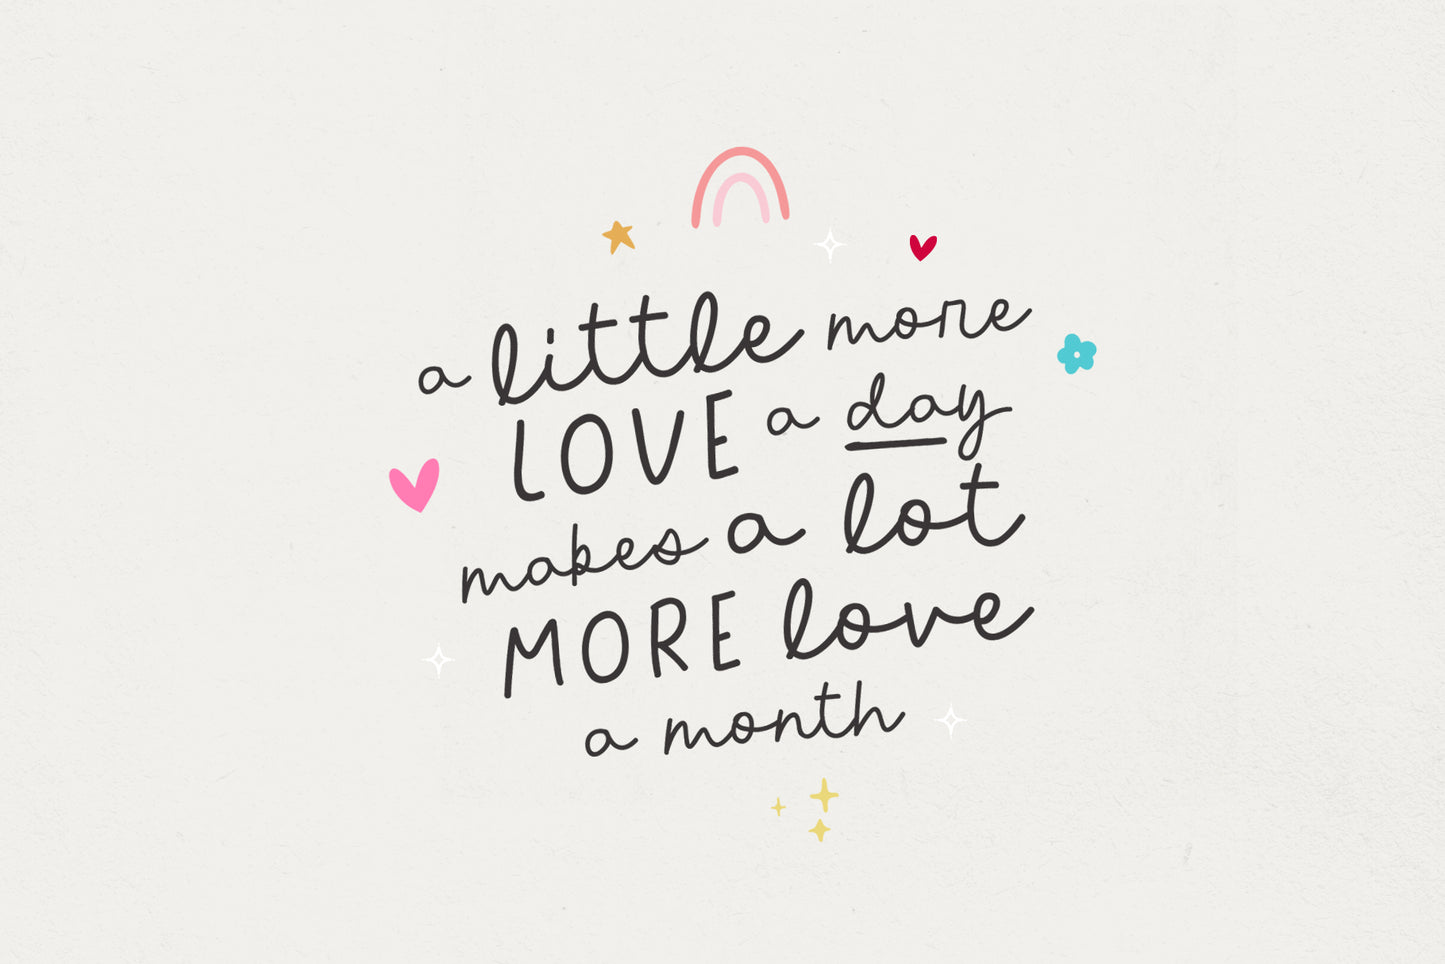 A Little of Love Quirky Font Duo